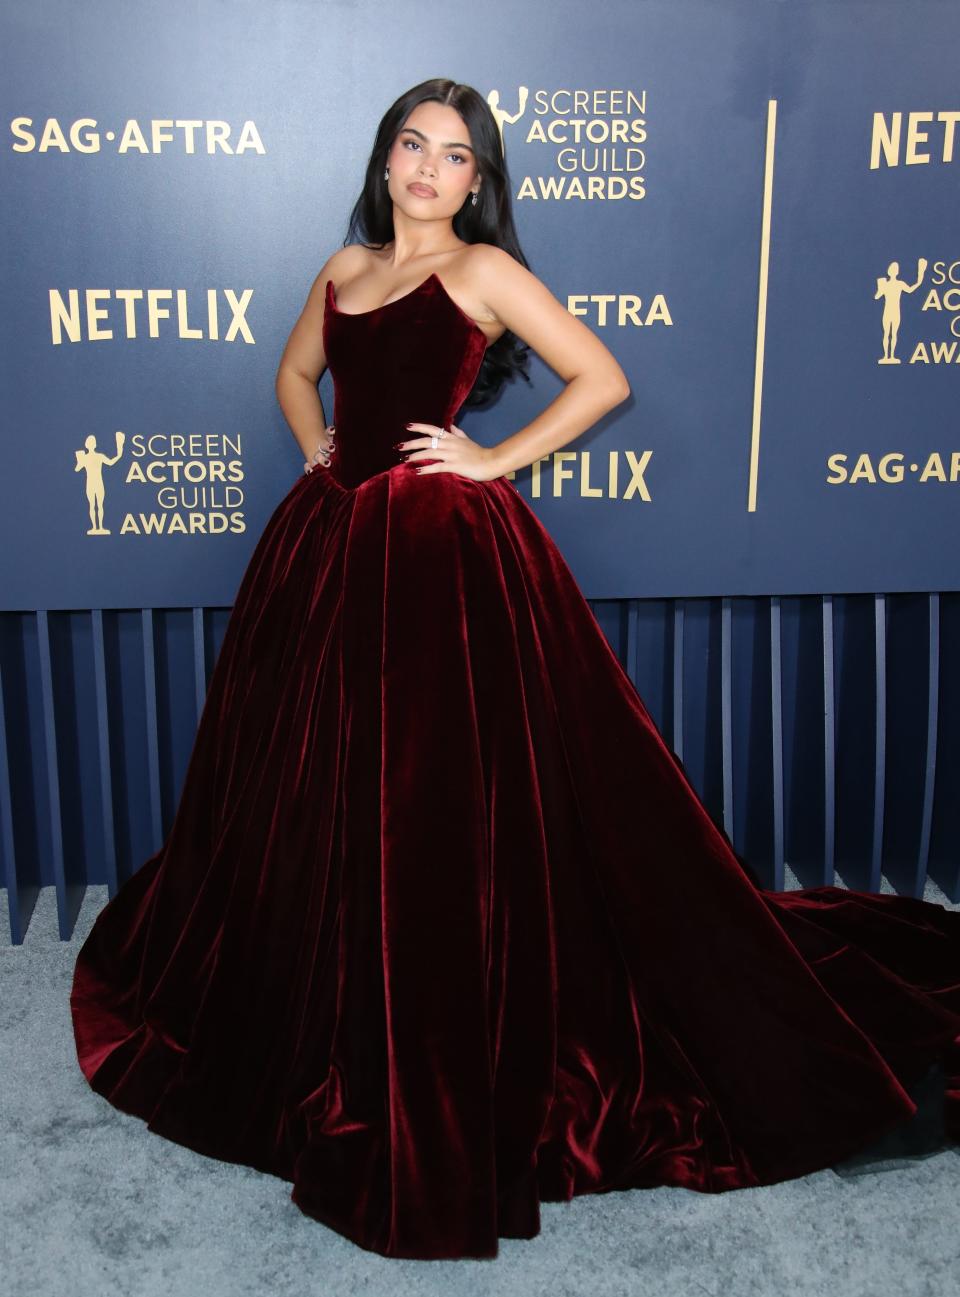 Ariana Greenblatt brought it to the Screen Actors Guild Awards on Saturday with her custom-made Vera Wang gown. But getting to the Shrine Auditorium was an ordeal.